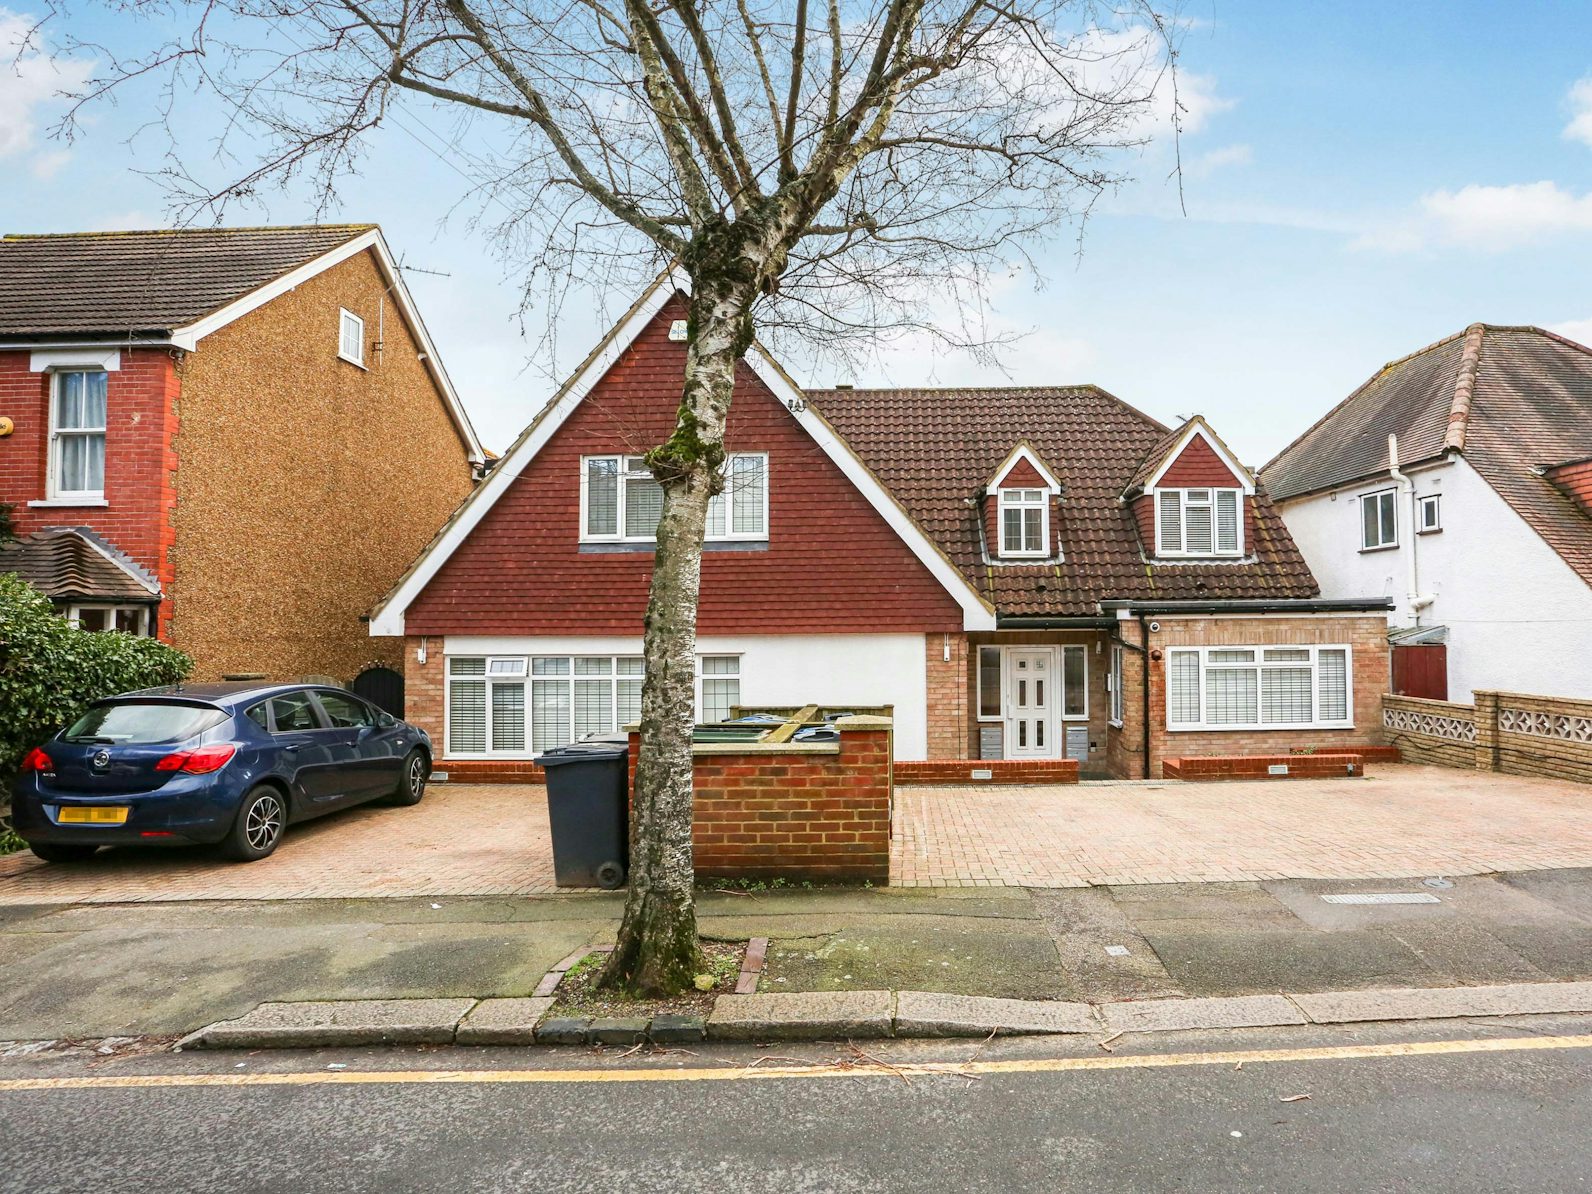 Flat for sale on 3A Woodmansterne Road Coulsdon, CR5